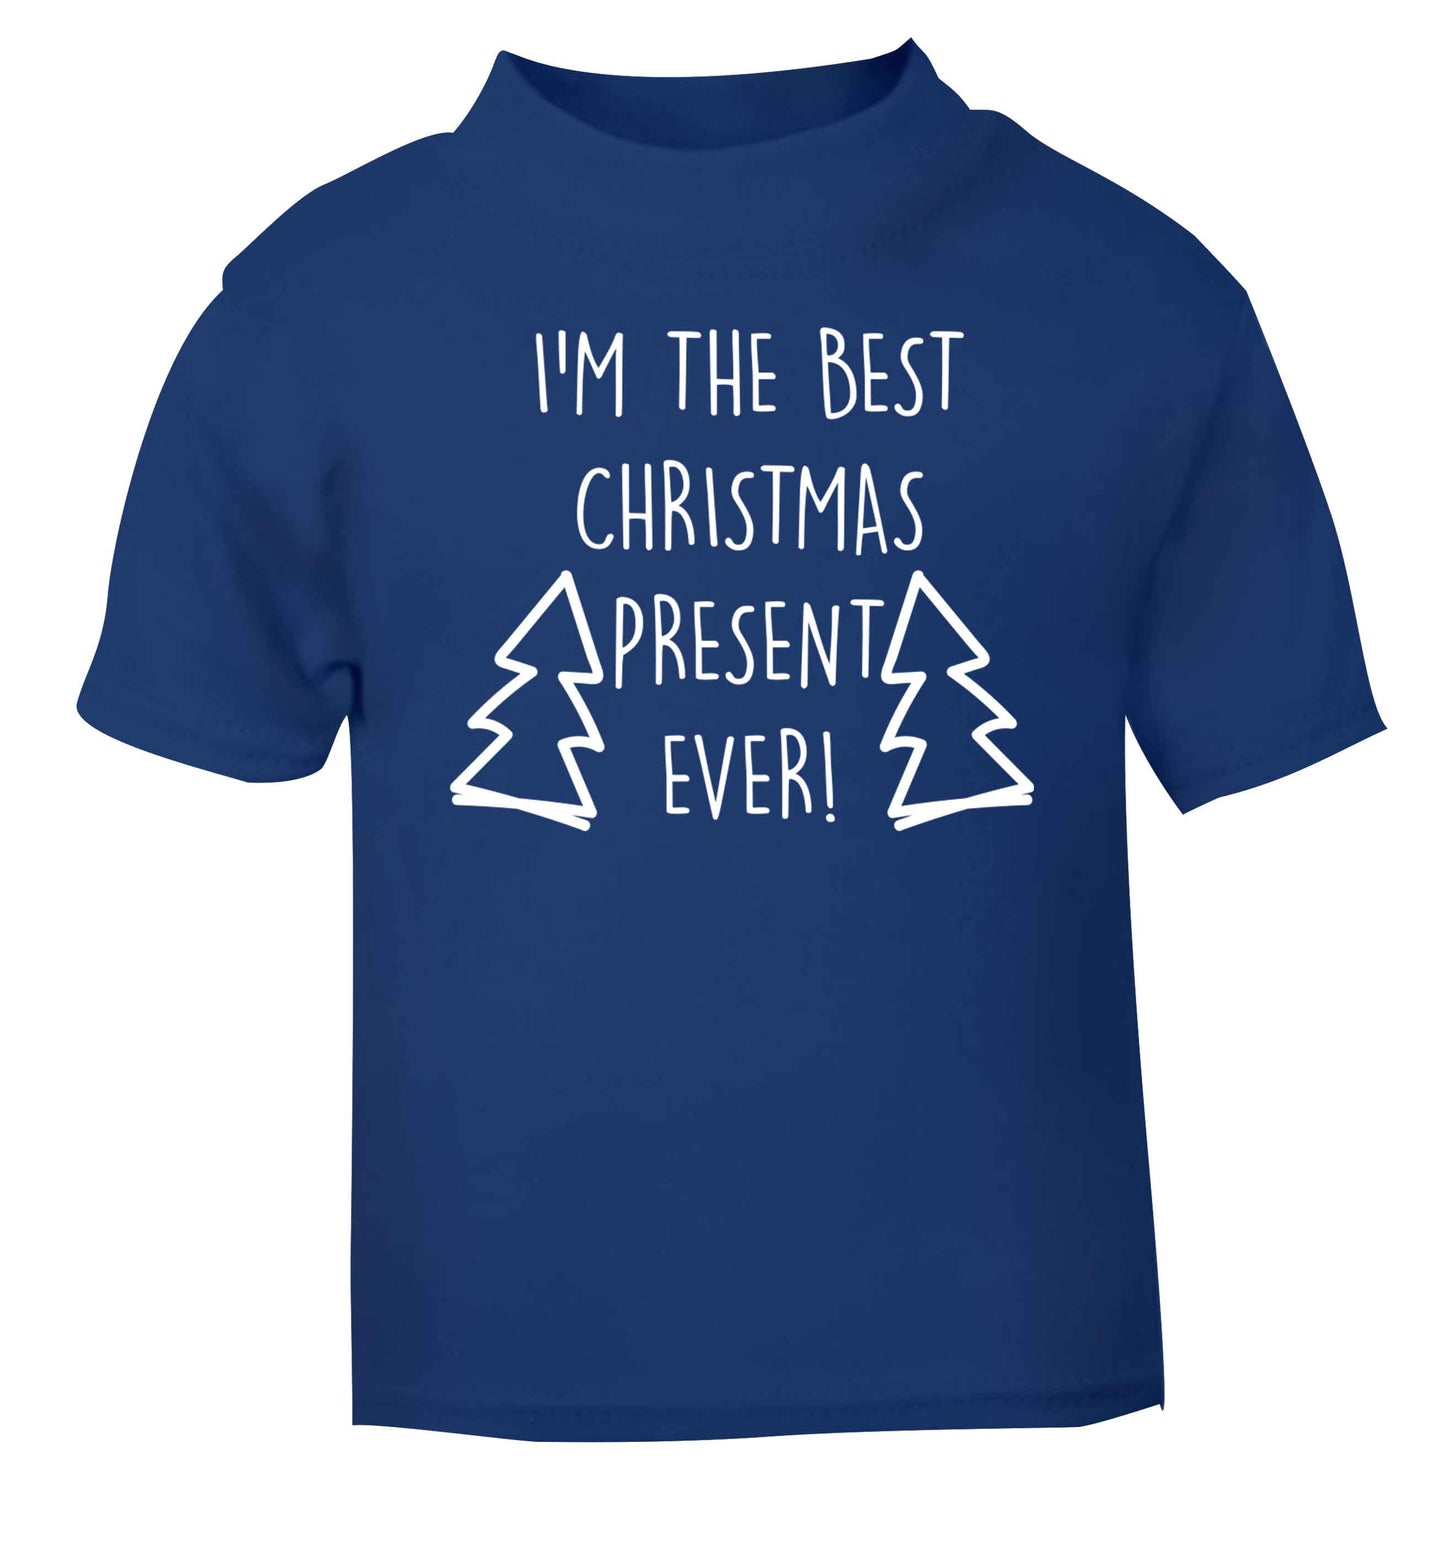 I'm the best Christmas present ever blue baby toddler Tshirt 2 Years